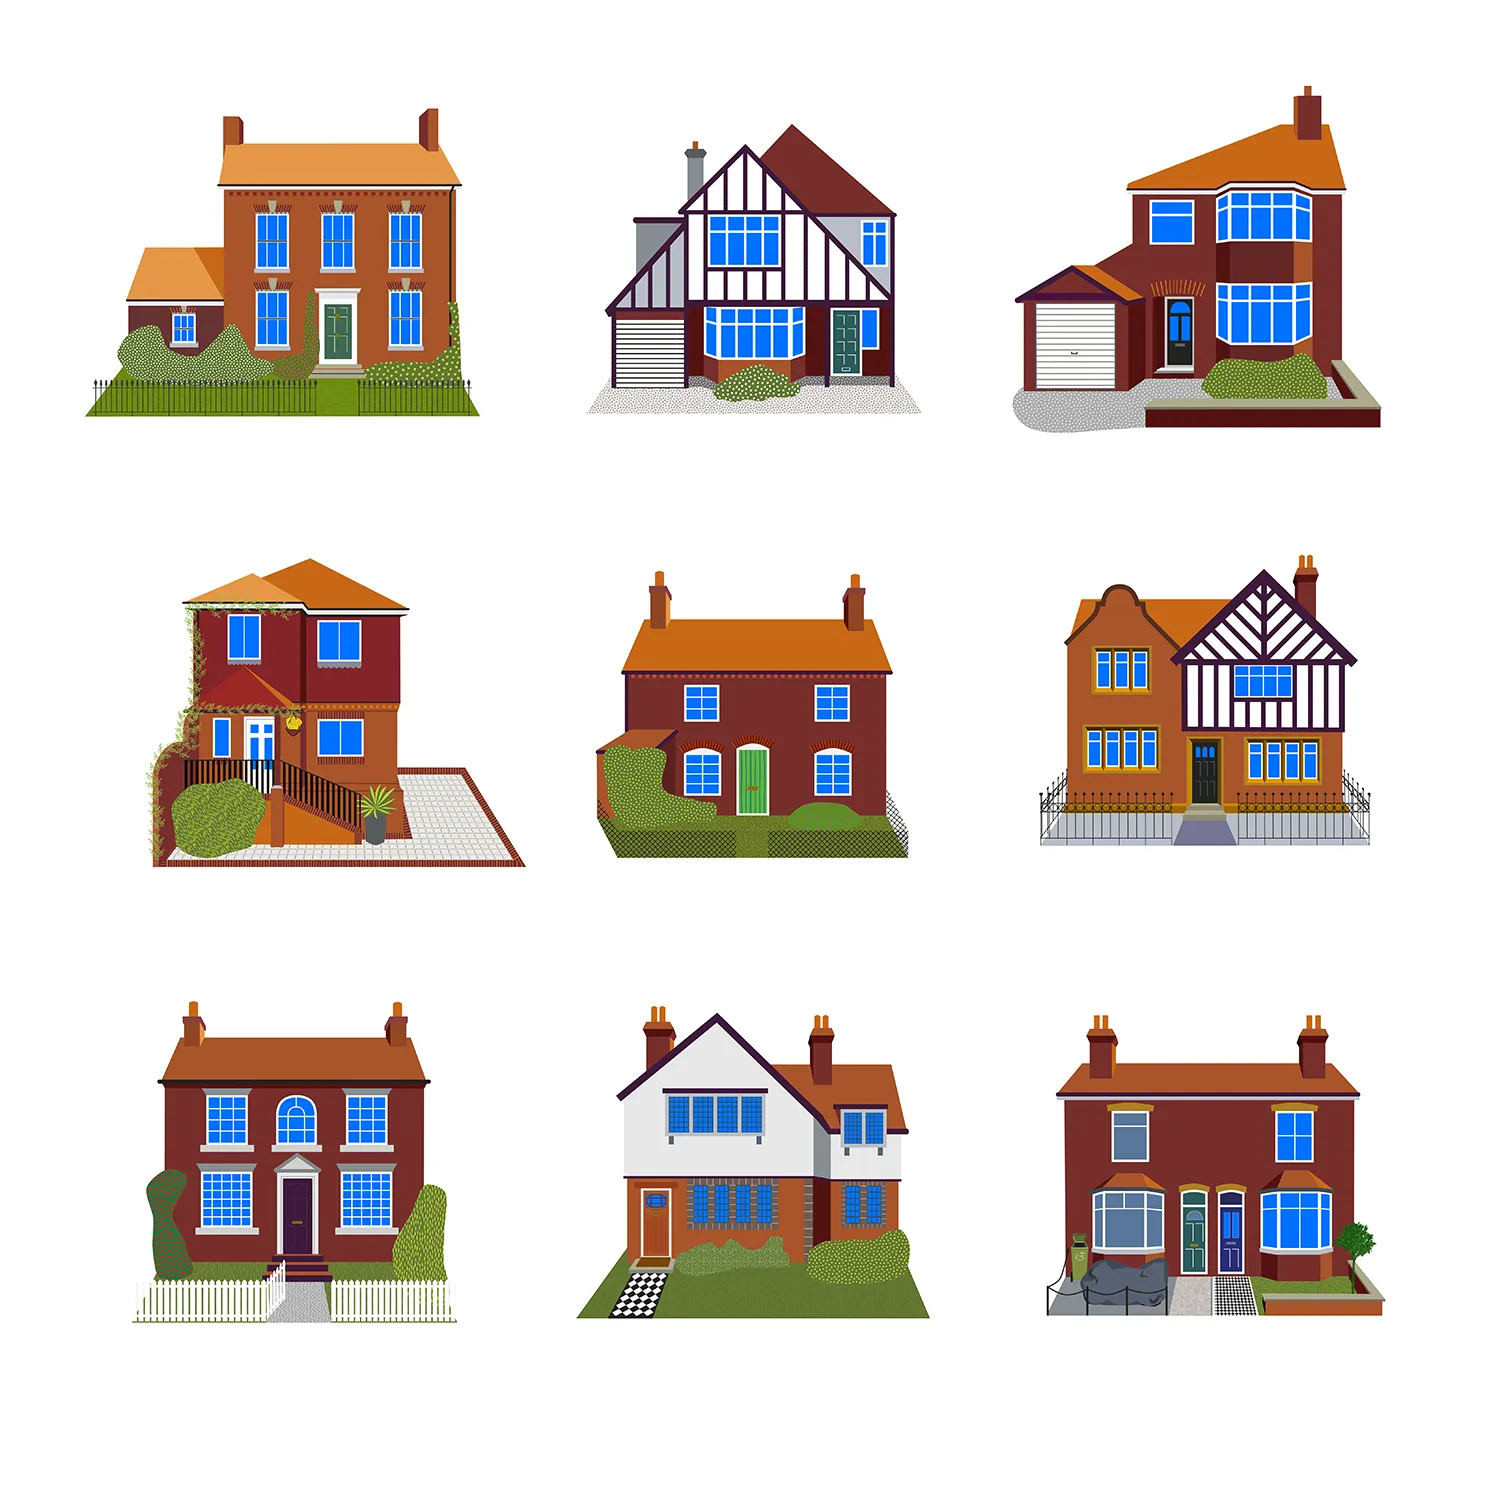 All house illustrations combined, shown on a white background